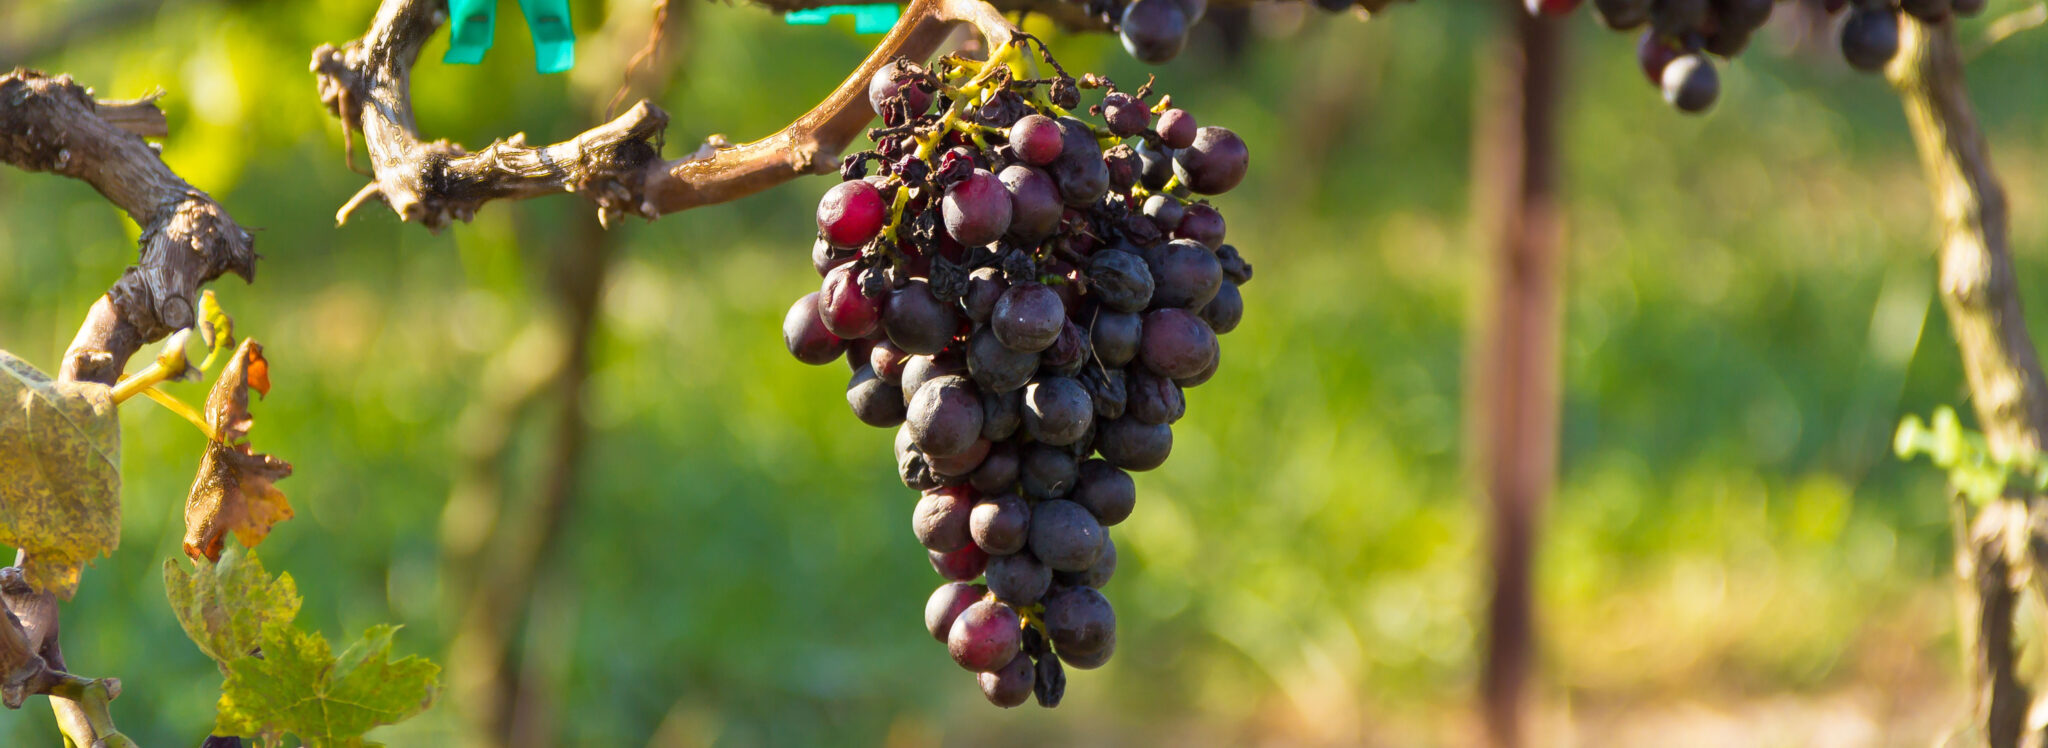 Grapes - Stock Image